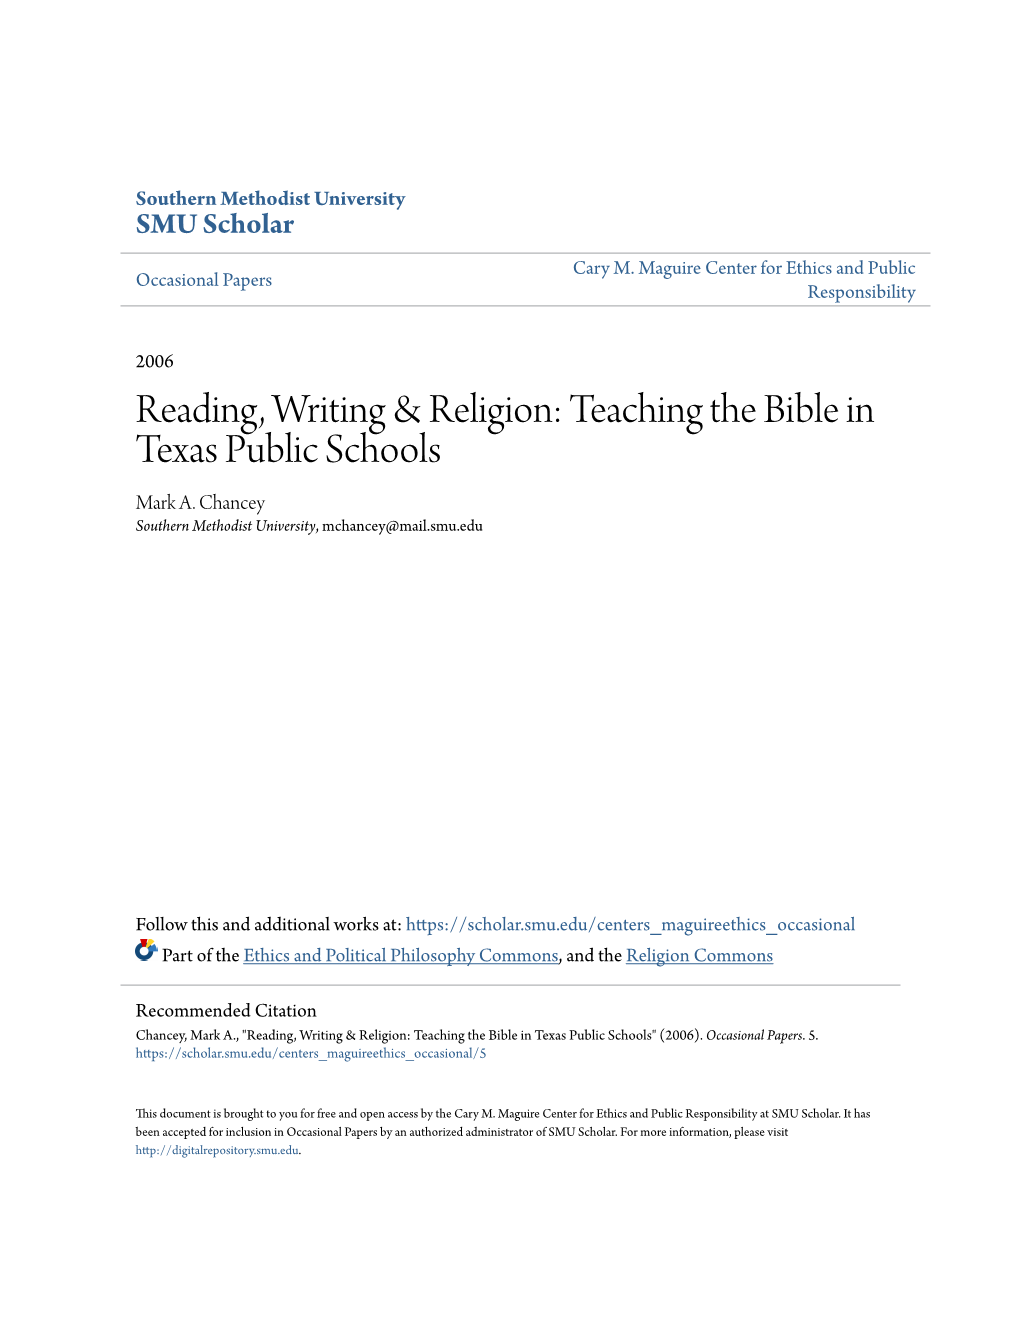 Reading, Writing & Religion: Teaching the Bible in Texas Public Schools